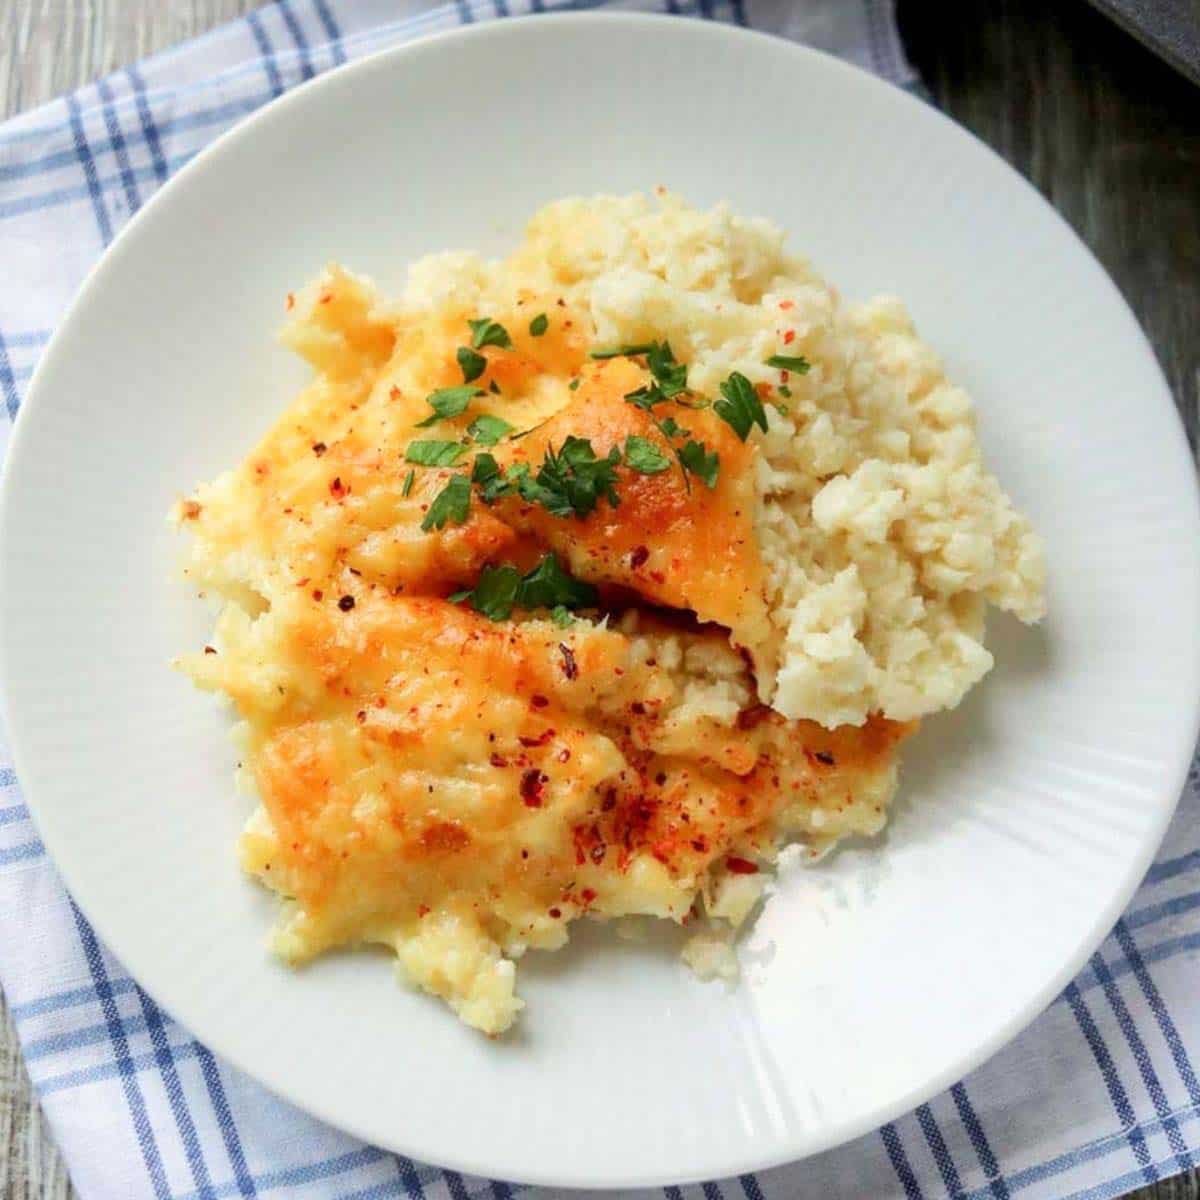 Thumbnail of low calorie mashed cauliflower.